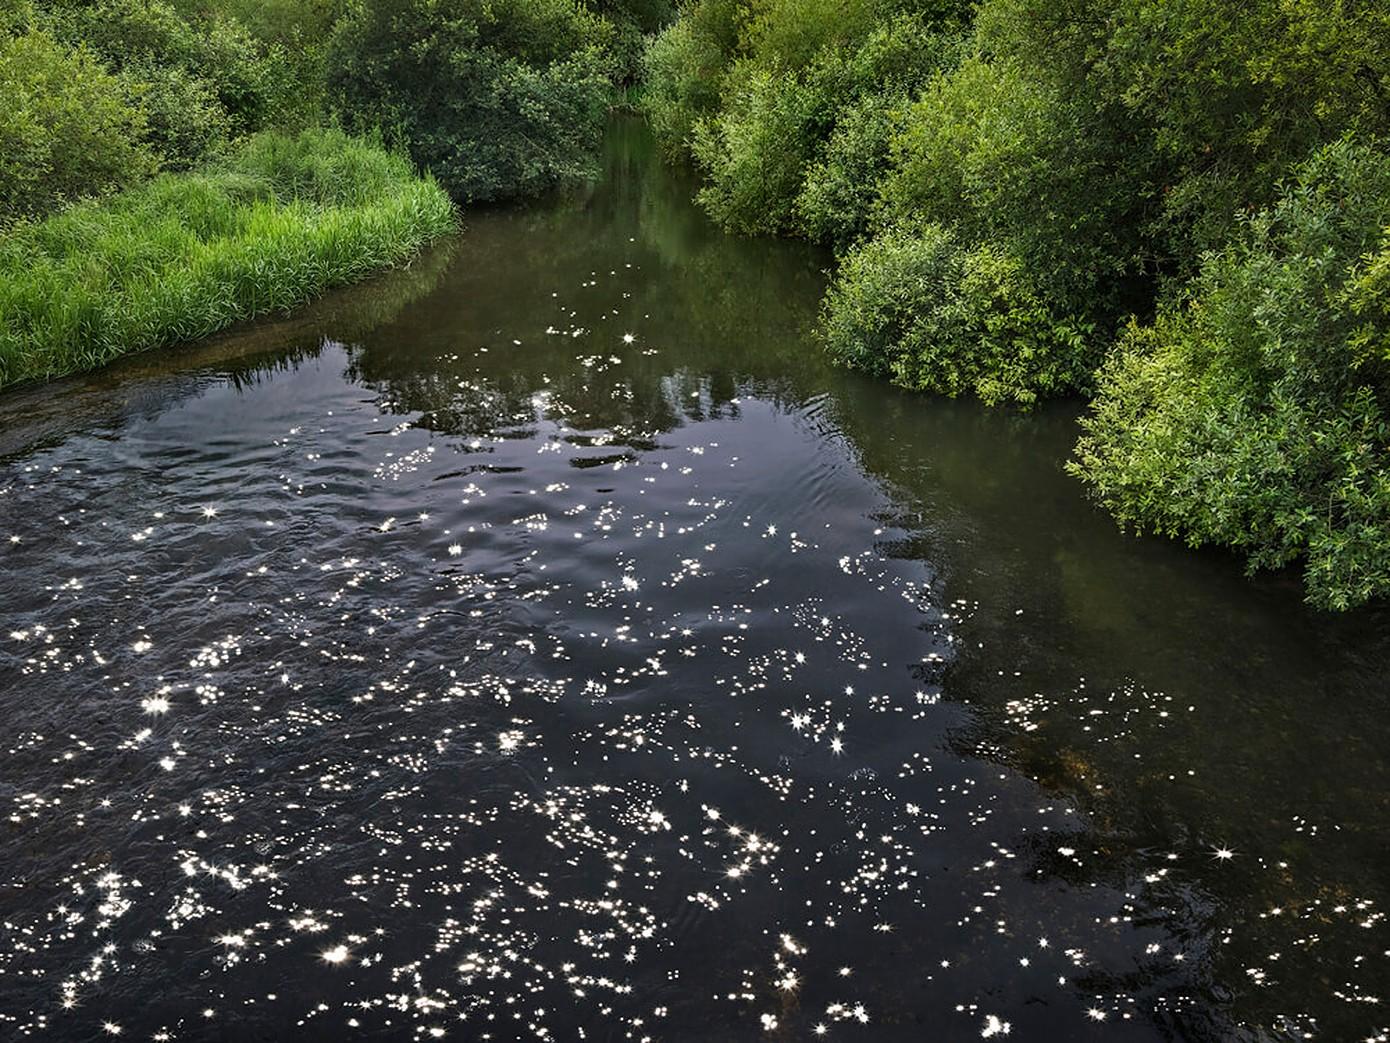 All prints are produced to order and lead times are expected between 15-20 days.

Chalk Streams 4 is a stunning C-Type Print on Fuji Crystal Archive Paper in Maxima Matte. This size print is available in an Edition of 7 + 2 Artist Proofs.

In her